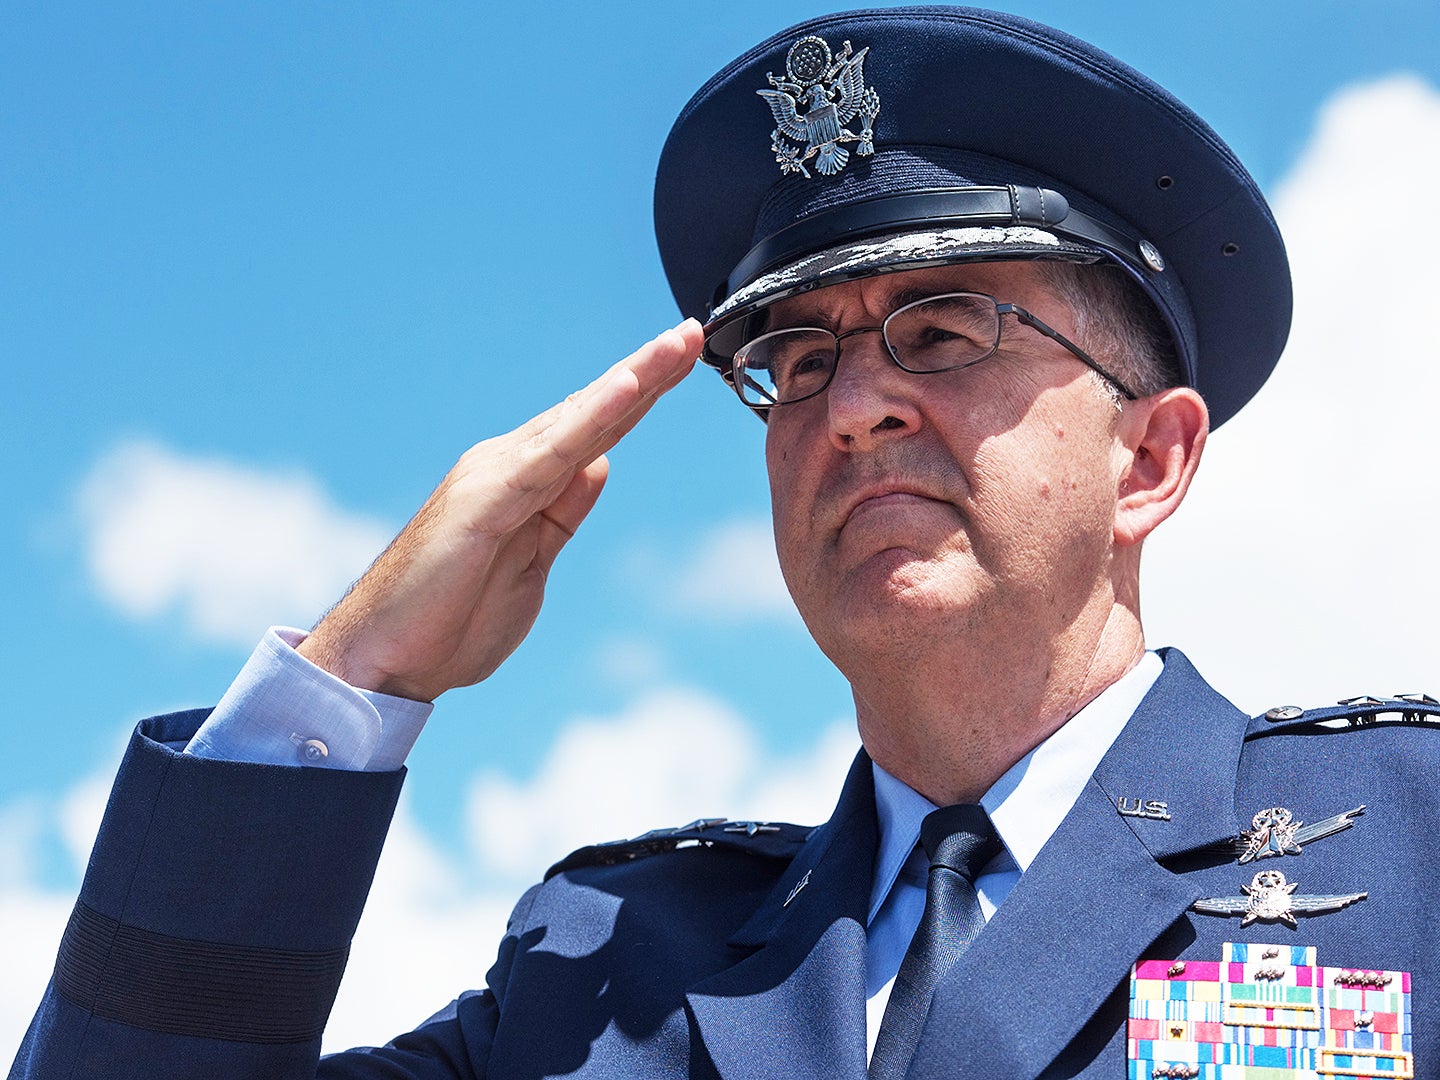 You Have To Hear What Keeps The Head Of U.S. Strategic Command Up At Night